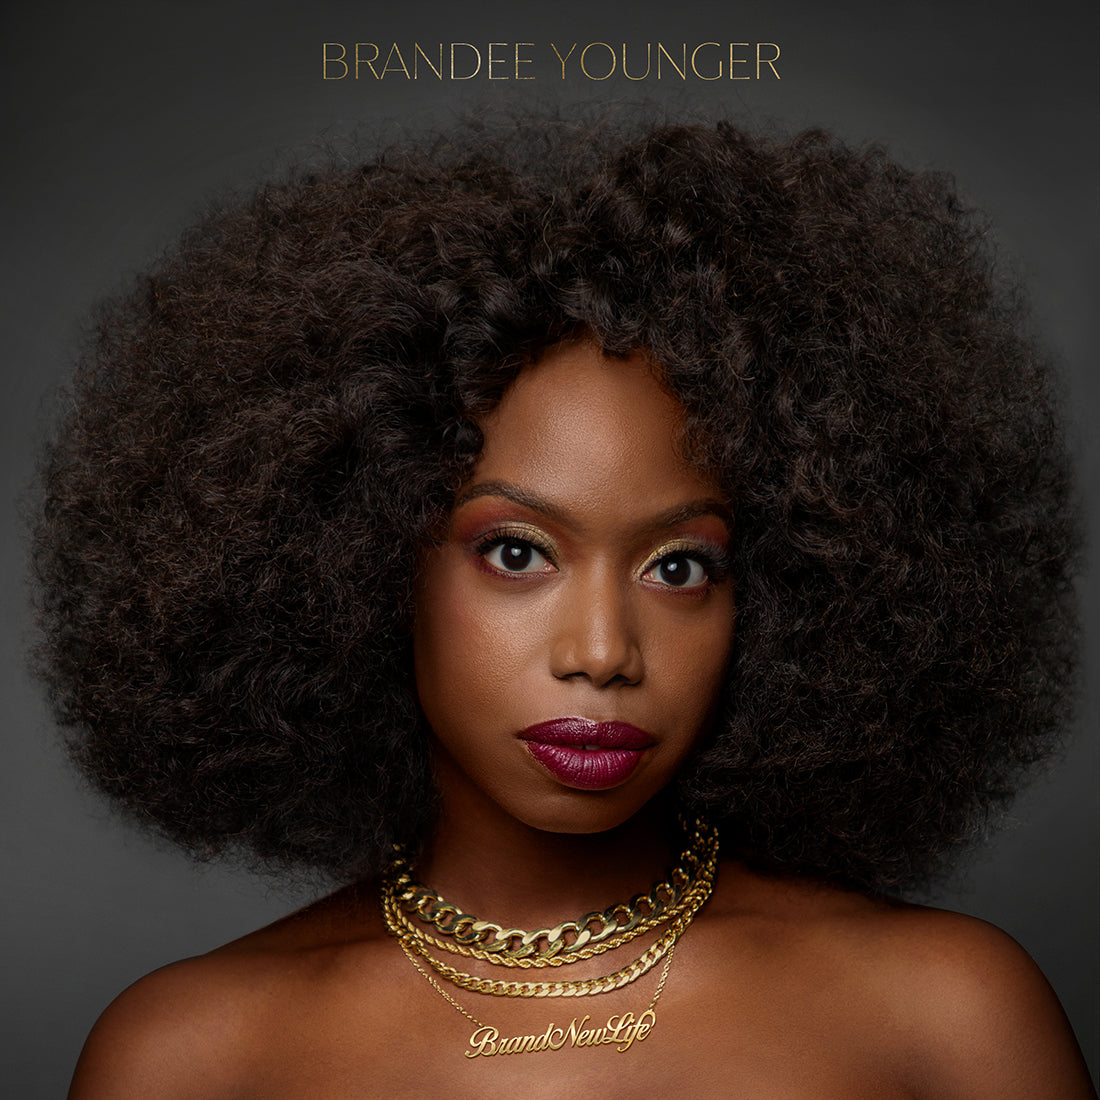 Brandee Younger - Brand New Life: CD